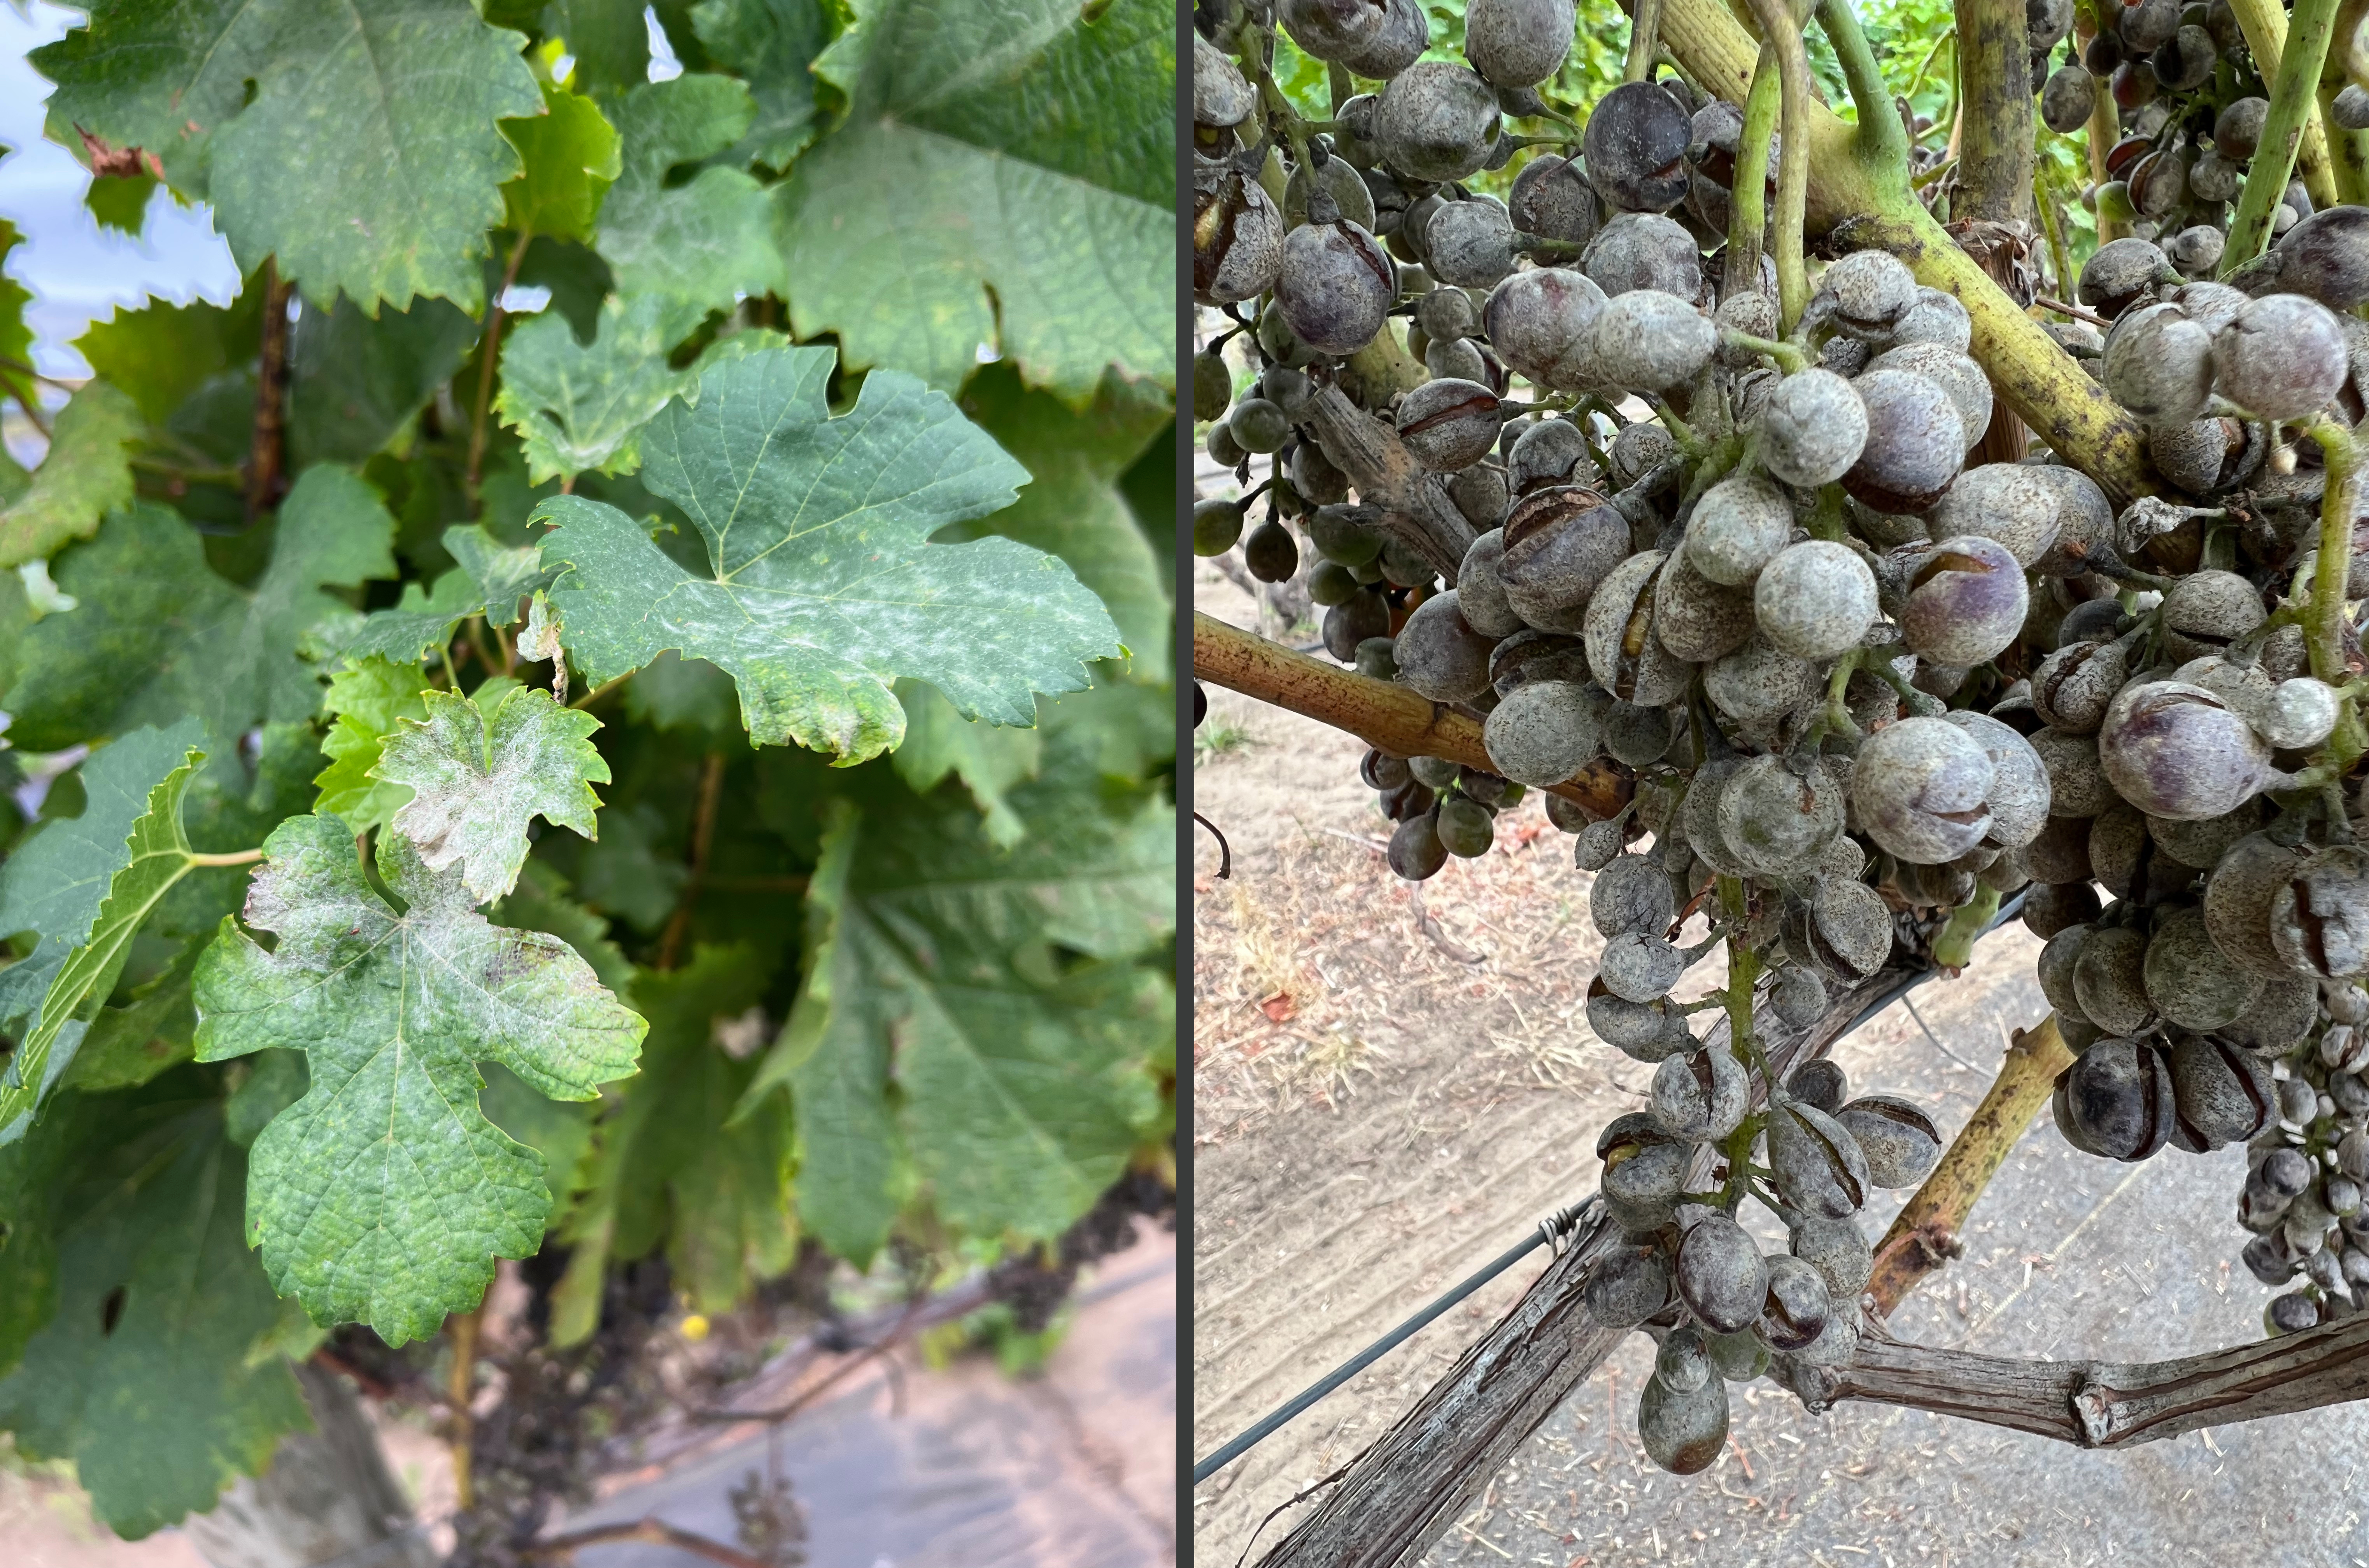 Powdery mildew on grape clusters and leaves.